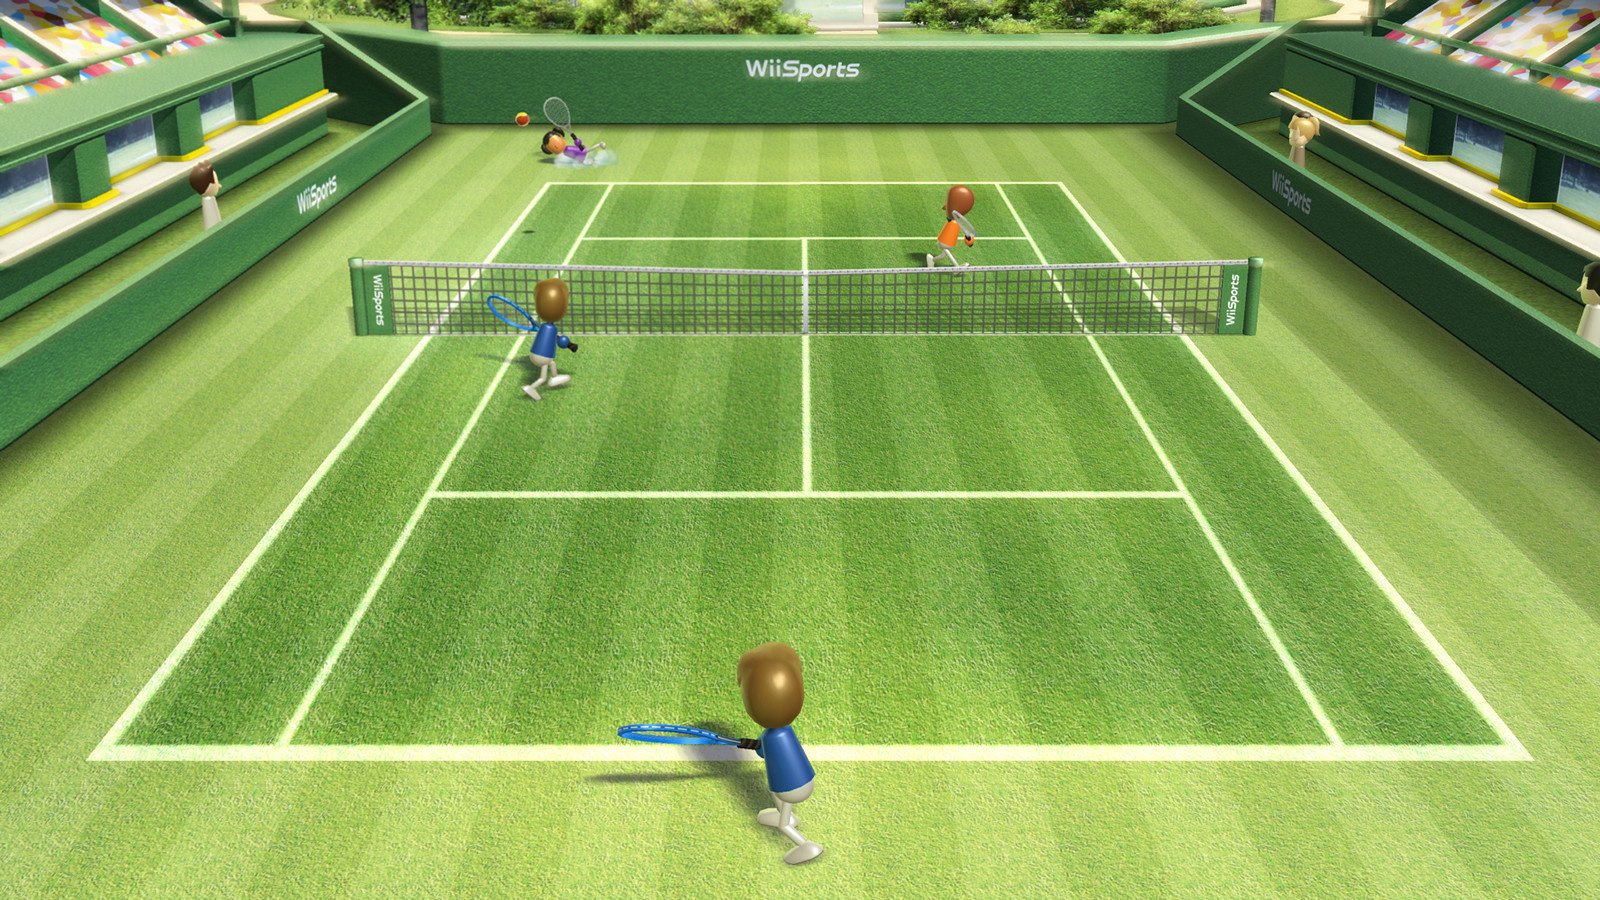 Coronavirus Isolation Seems To Be Causing ﻿A Spike In Wii ﻿Sports ...